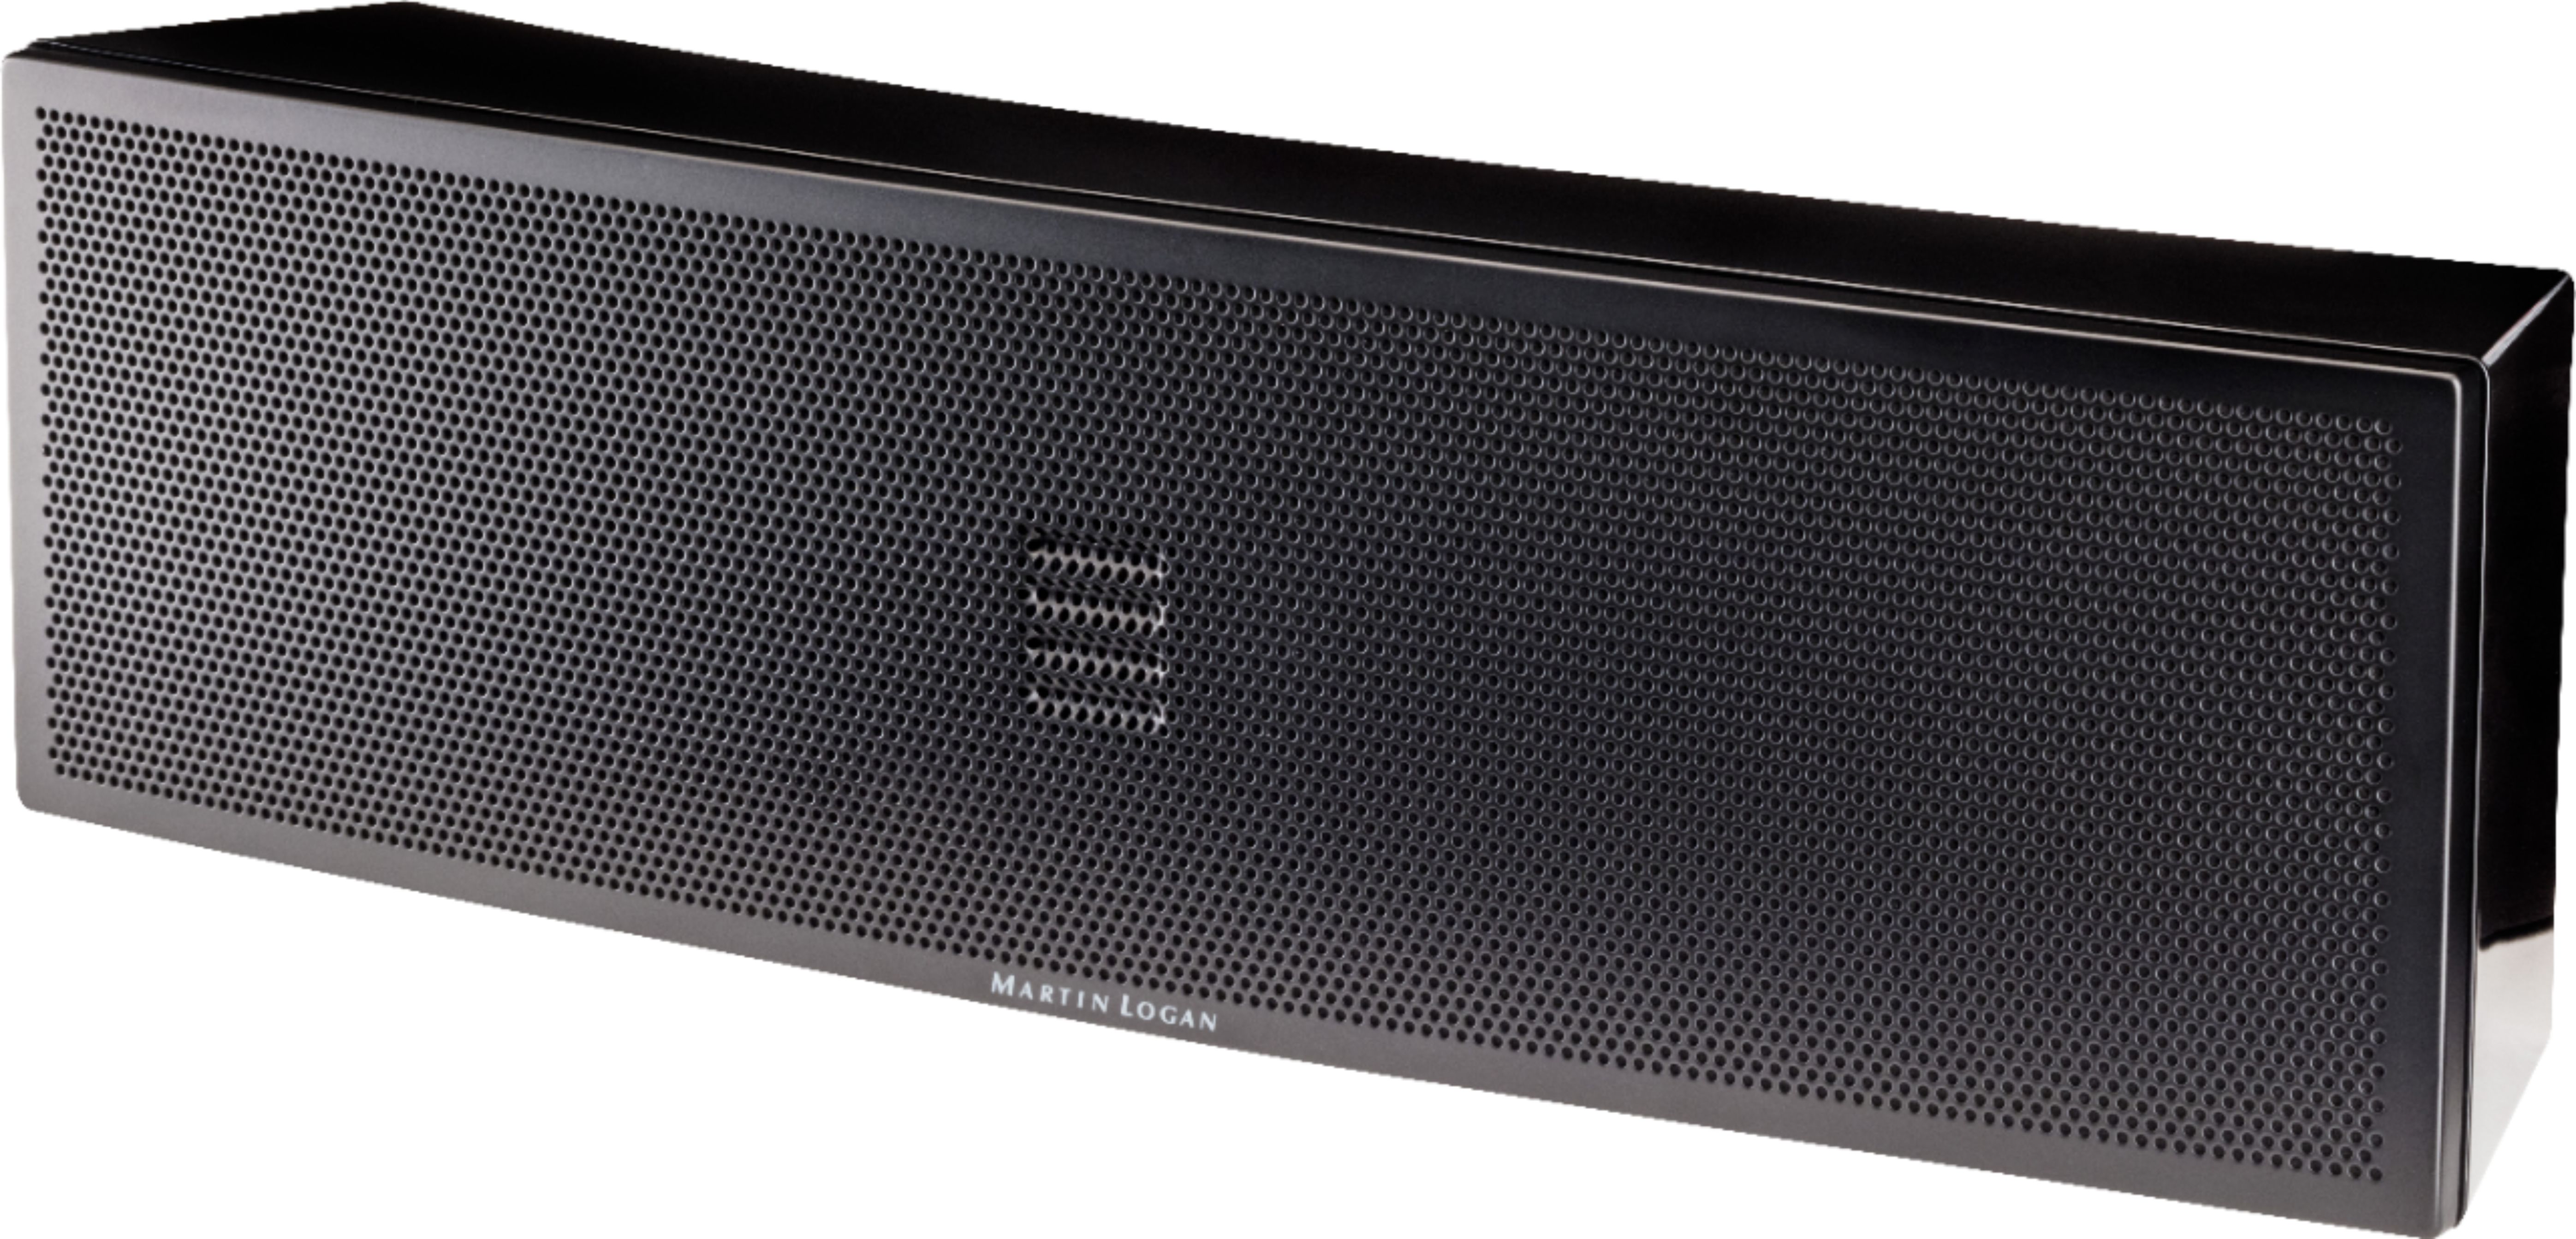 Left View: Bose - 2.1-Channel Acoustimass 5 Series Speaker System - Black